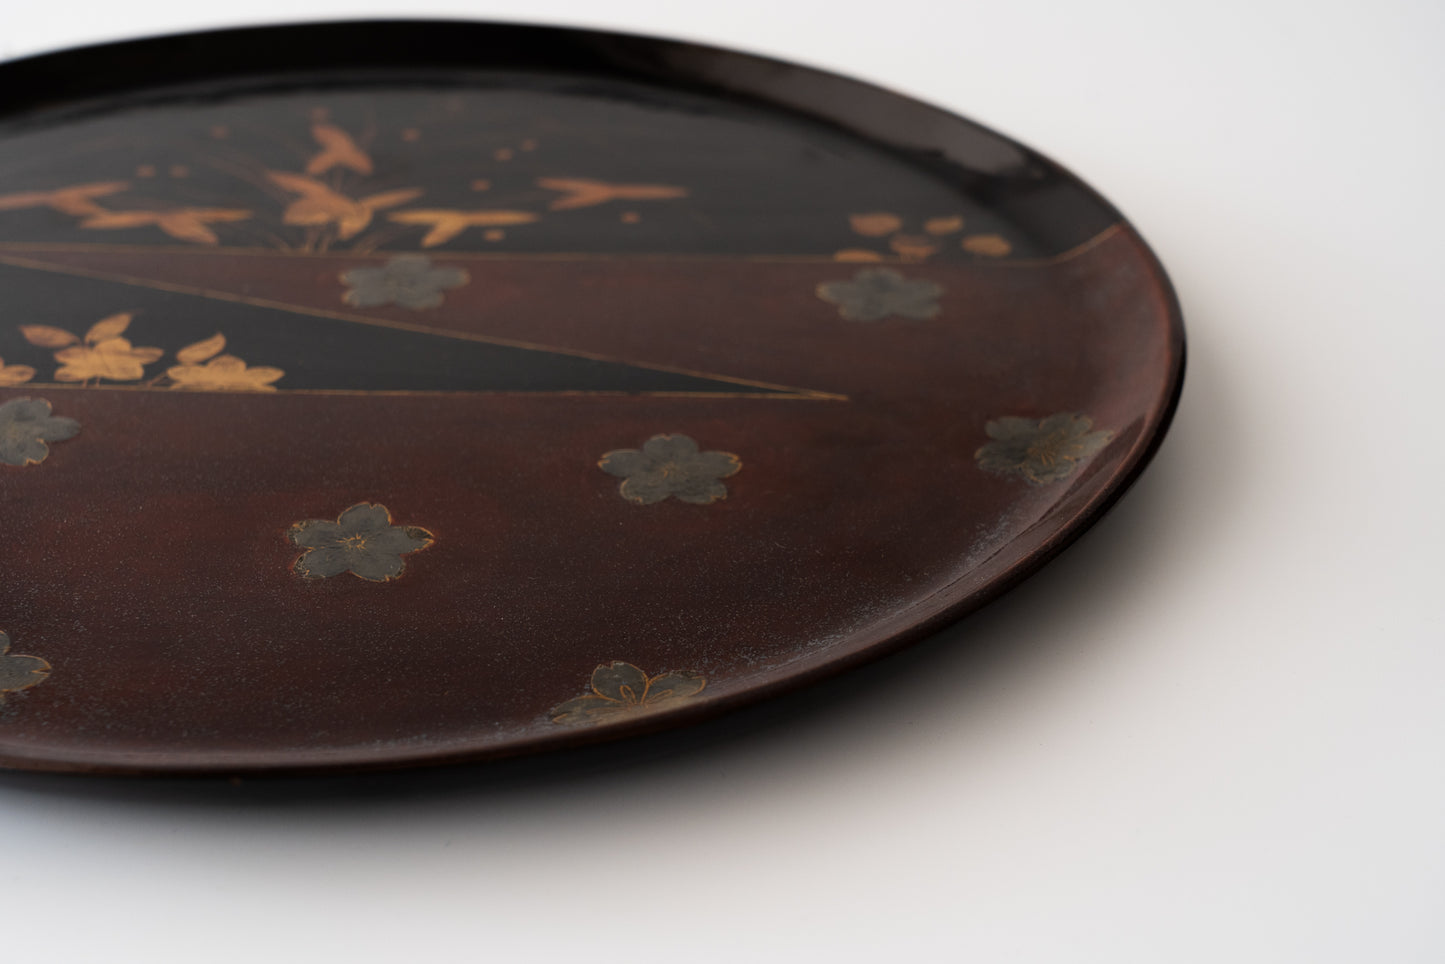 Makie tray with cherry blossom pattern